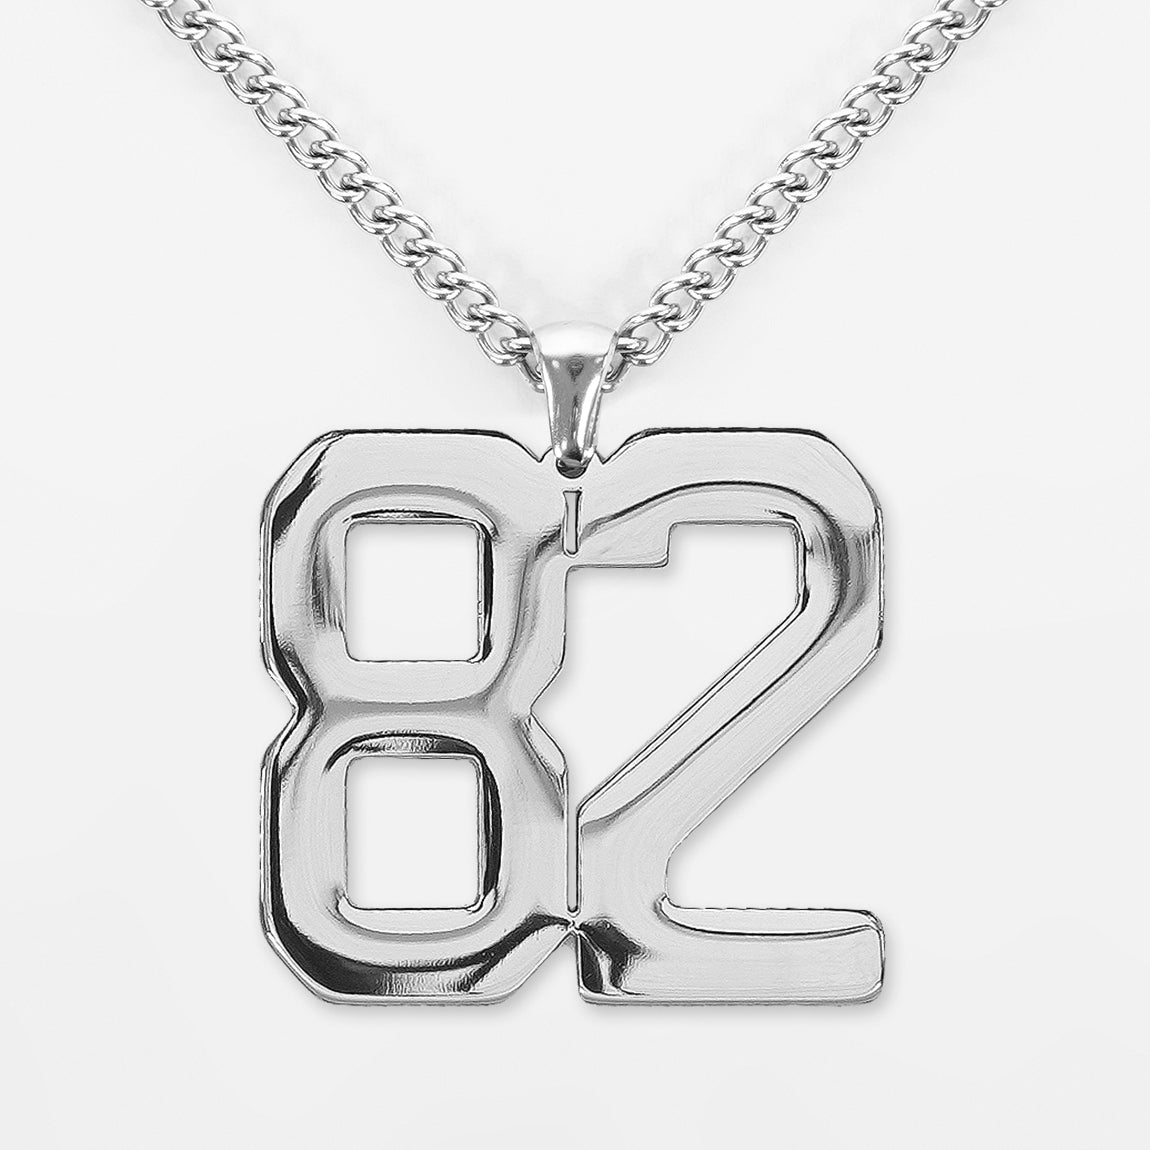 82 Number Pendant with Chain Necklace - Stainless Steel